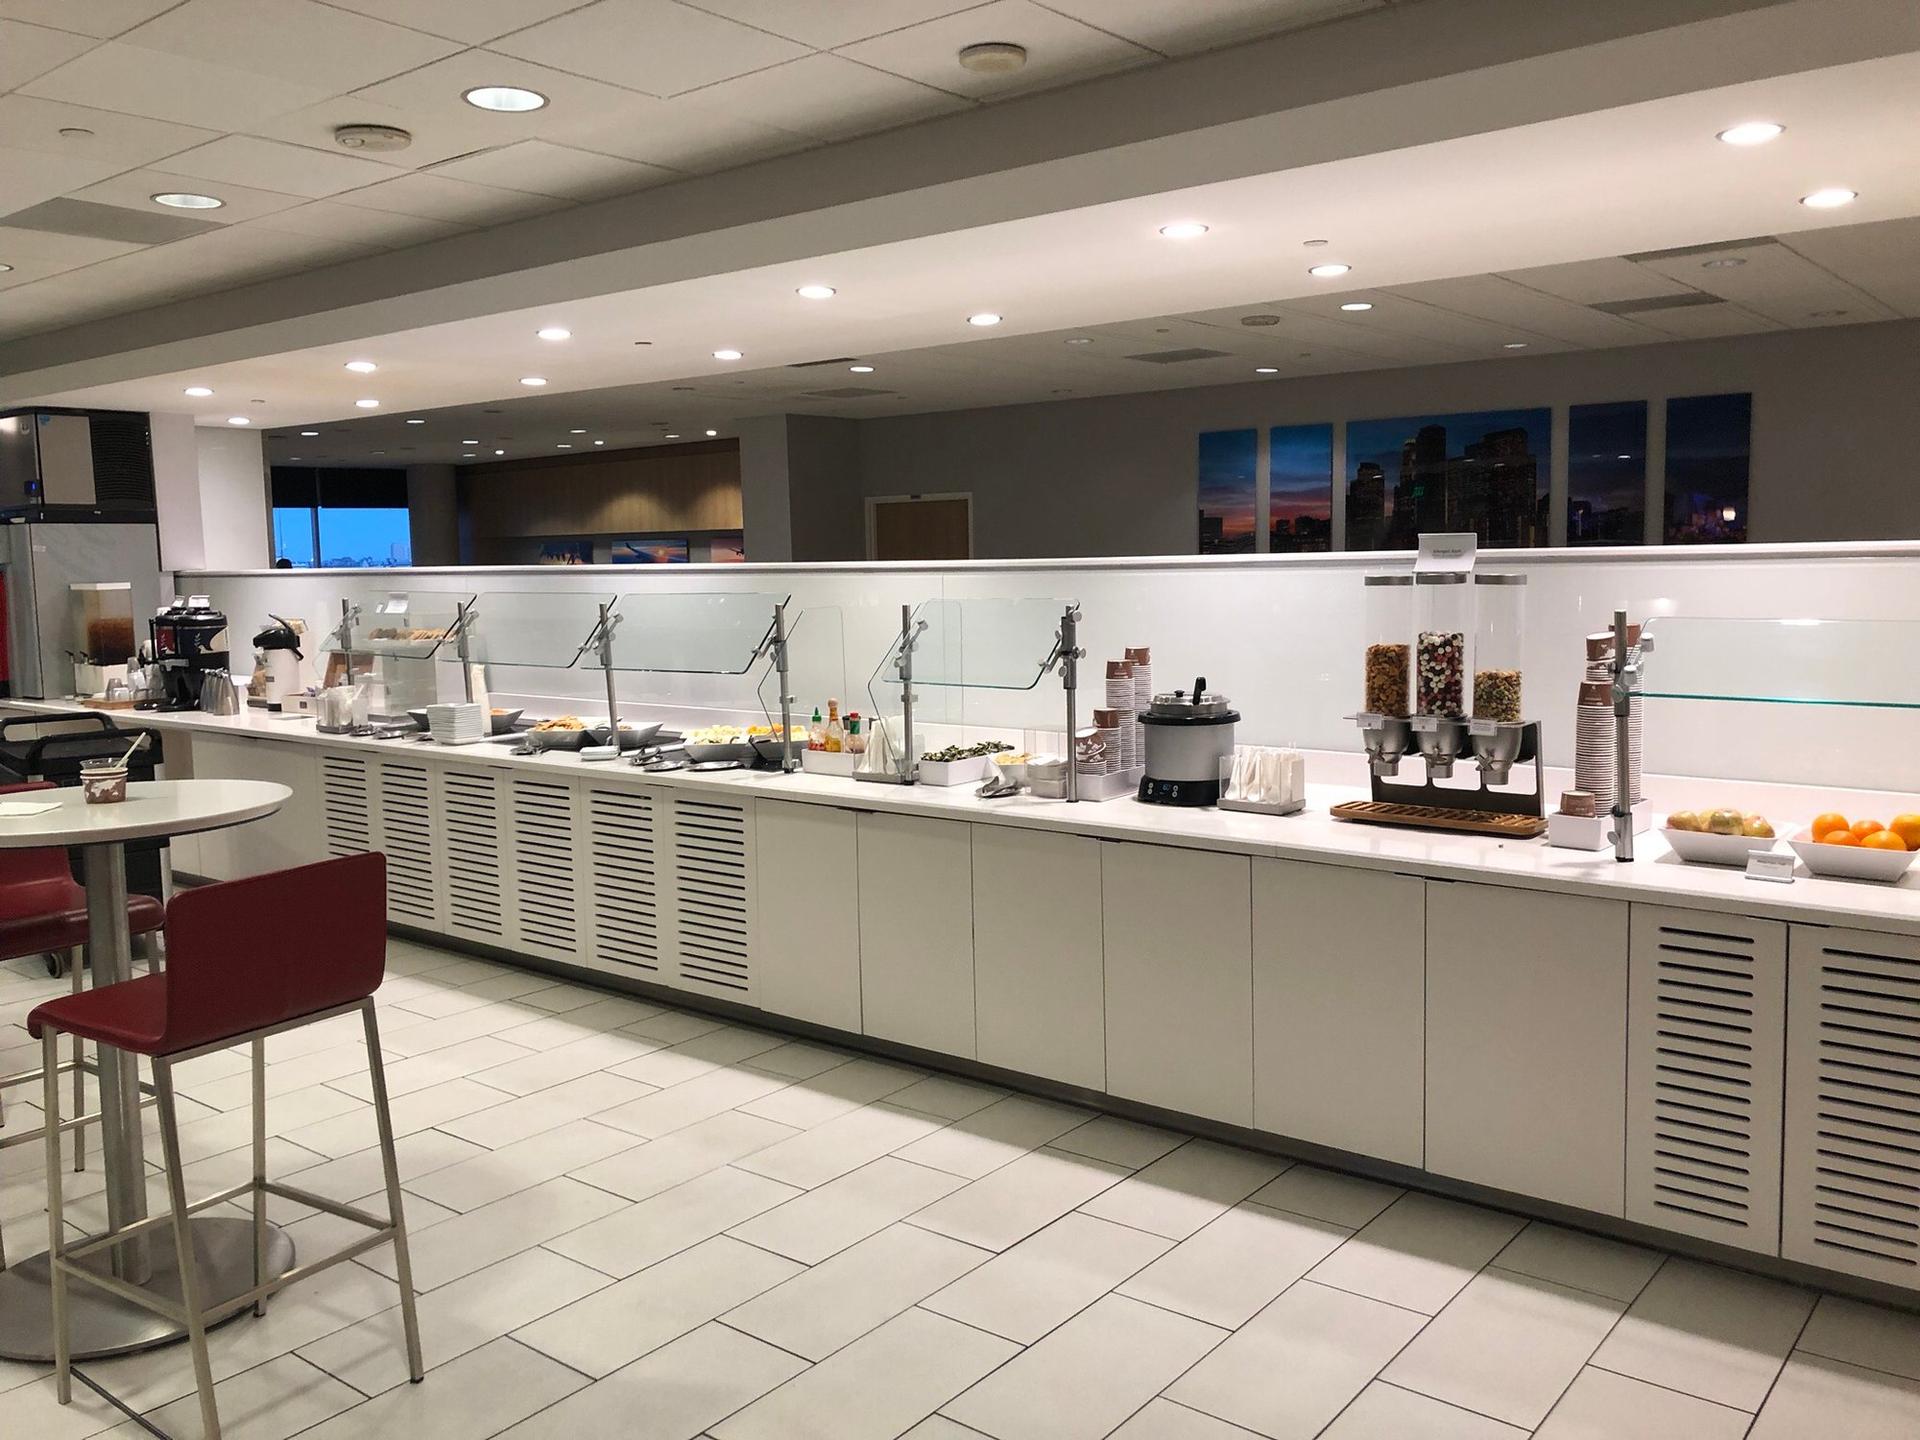 American Airlines Admirals Club image 21 of 38